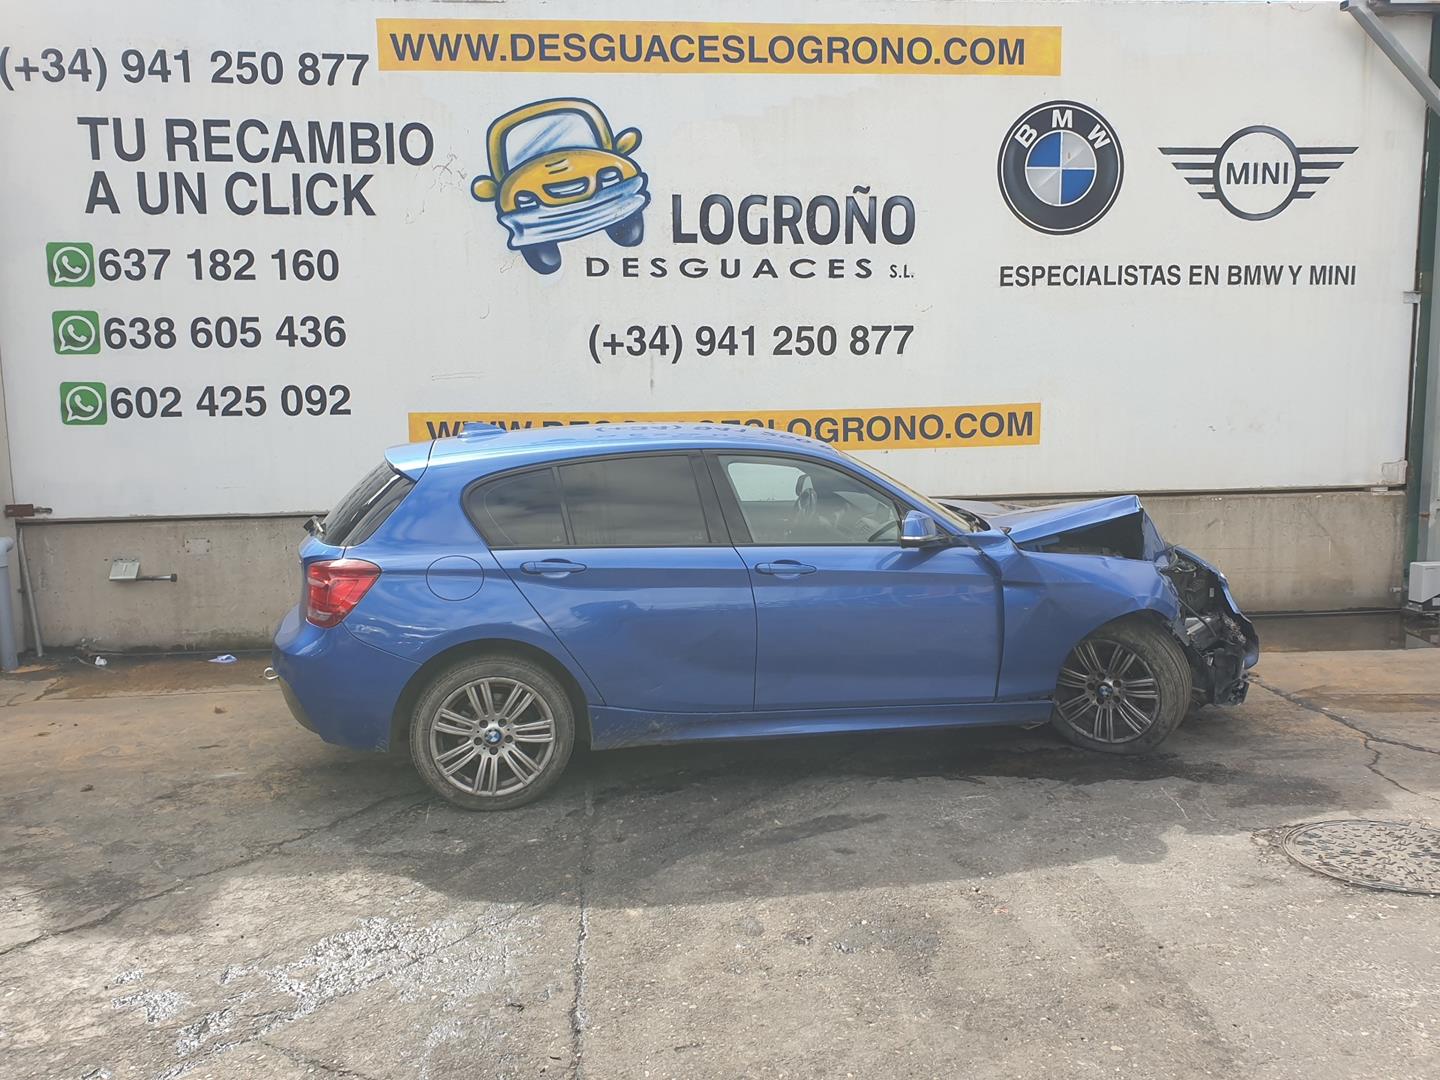 BMW 1 Series F20/F21 (2011-2020) Other Body Parts 51247248535, 7248535 19881396